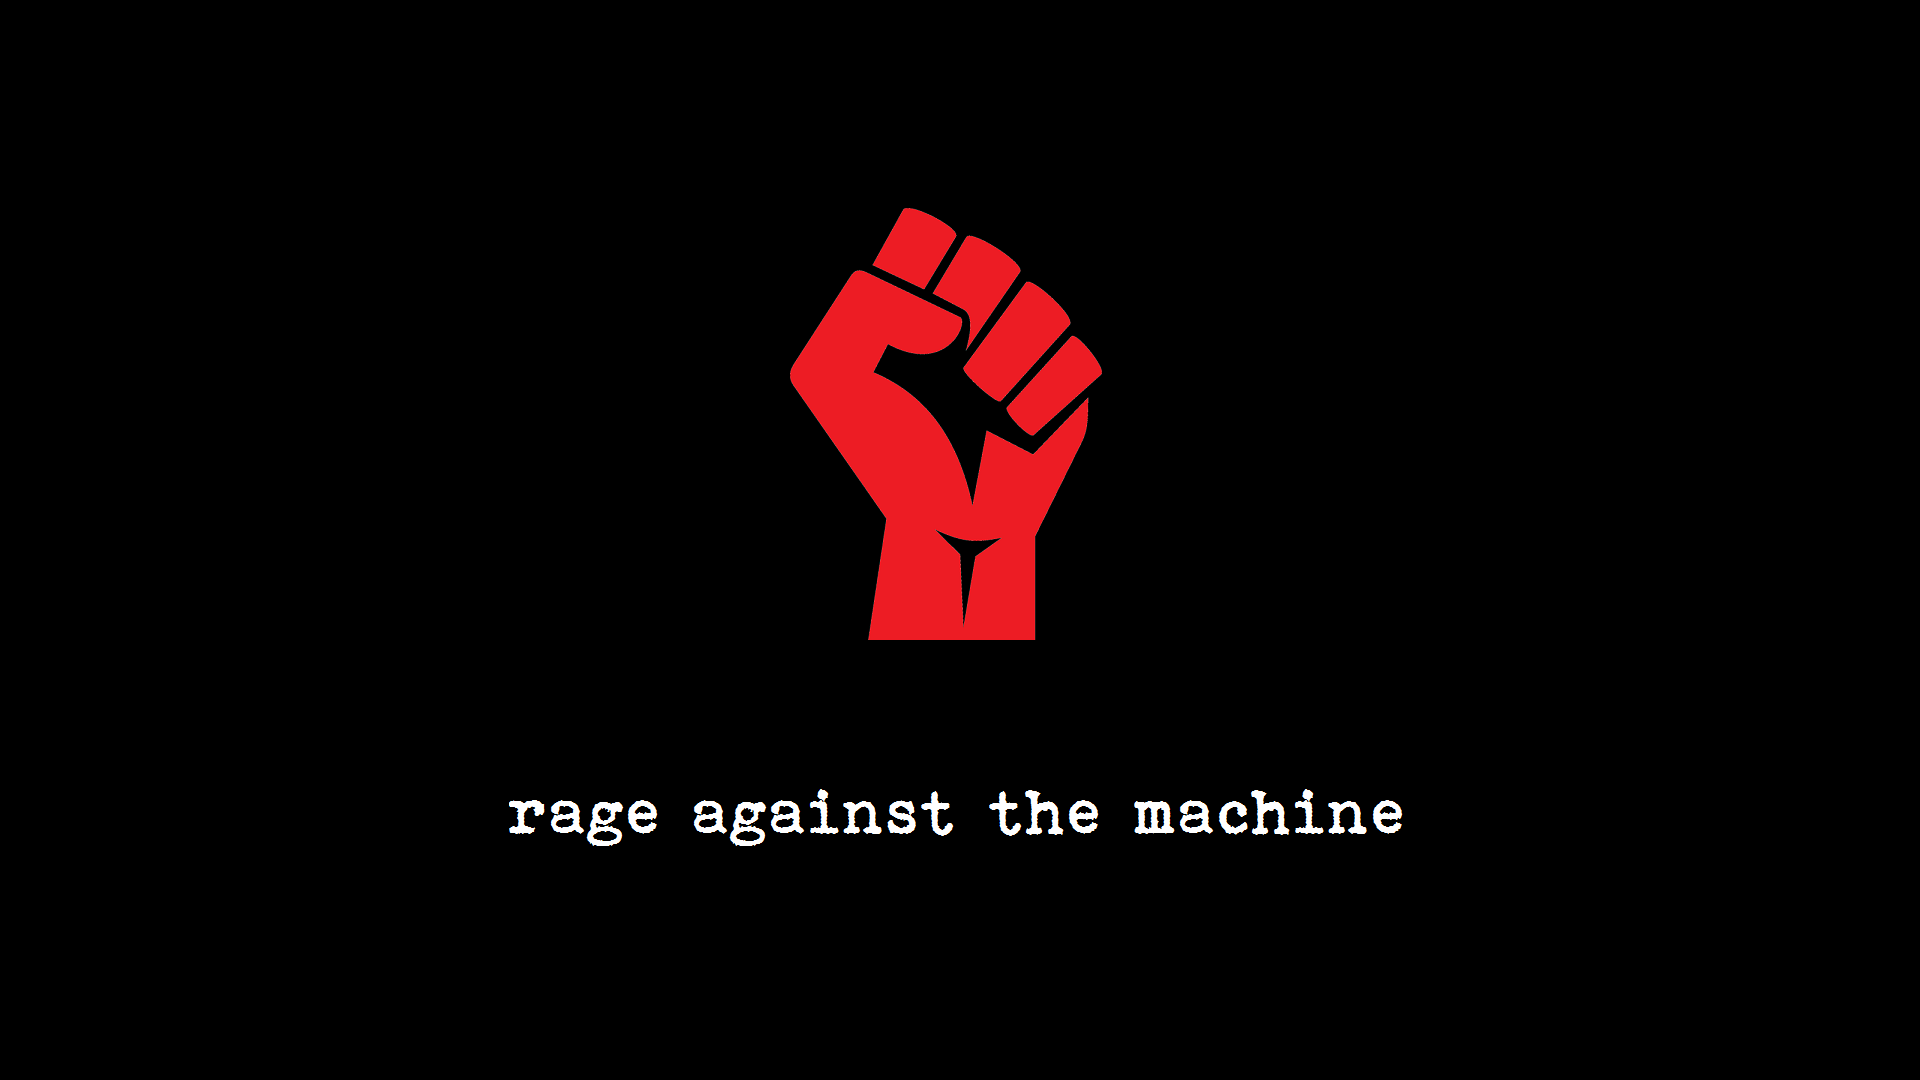 Rage Against the Machine Official Logo - Rage Against the Machine Wallpaper HD Wallpaper. Background Image